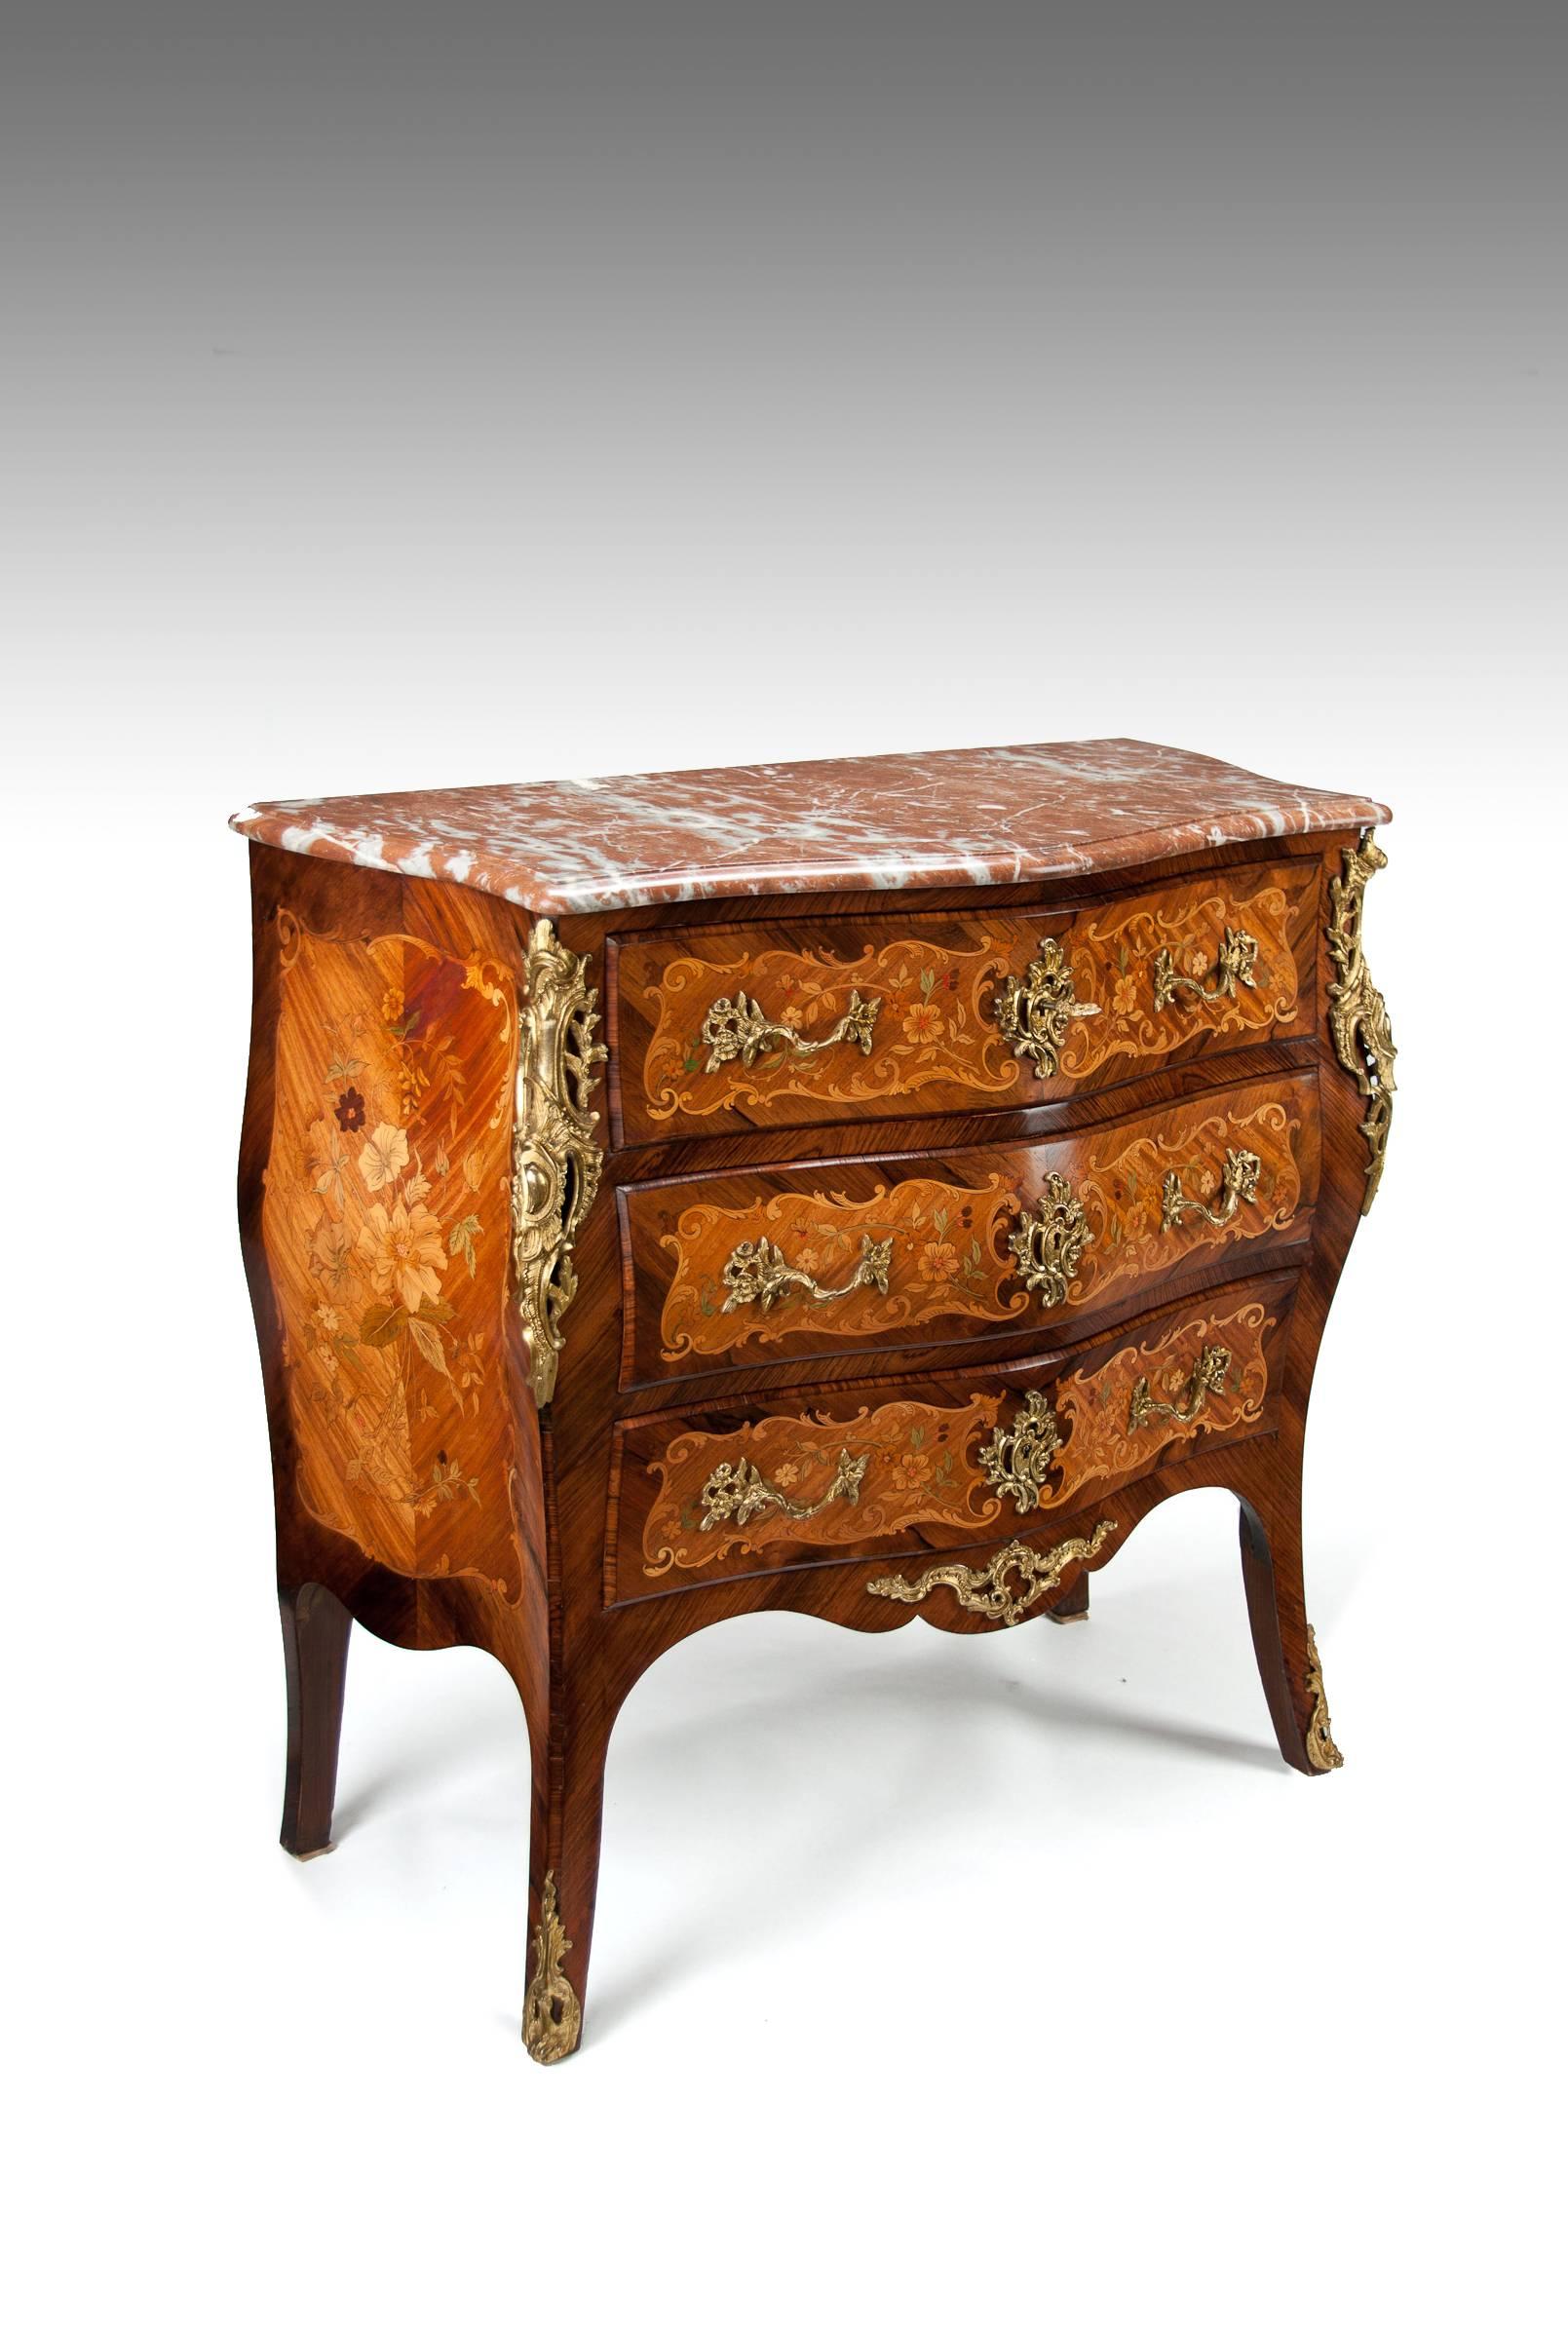 A fine quality antique French rosewood and kingwood floral marquetry inlaid pink marble topped bombe commode in the Louis XV Manner dating to circa 1910-1920.
This very well executed commode with finely inlaid marquetry panels has a serpentine